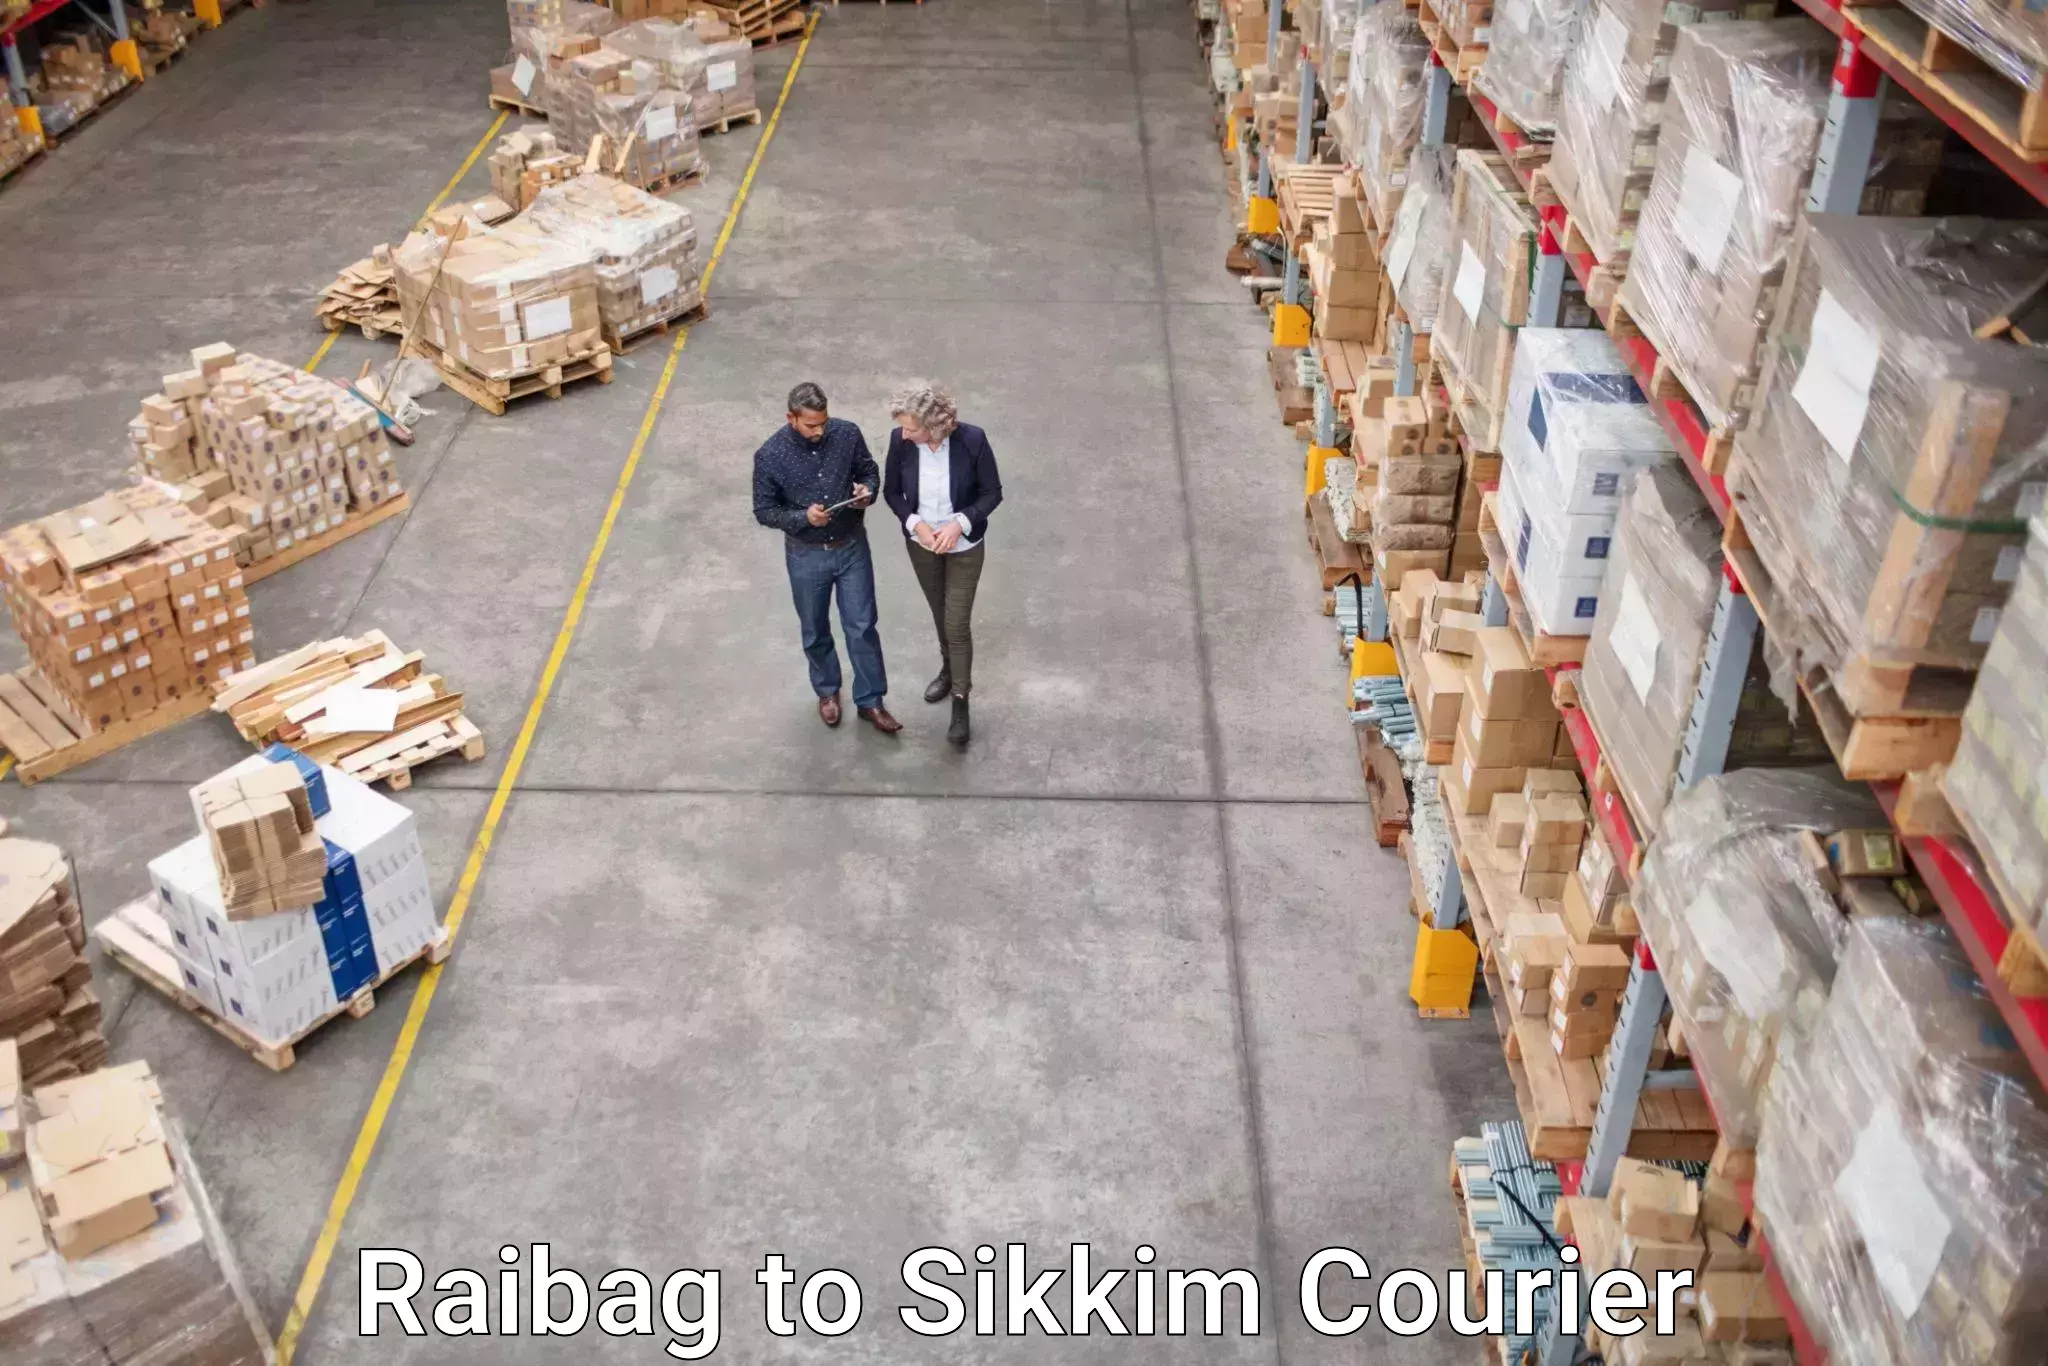 Modern courier technology Raibag to Pelling